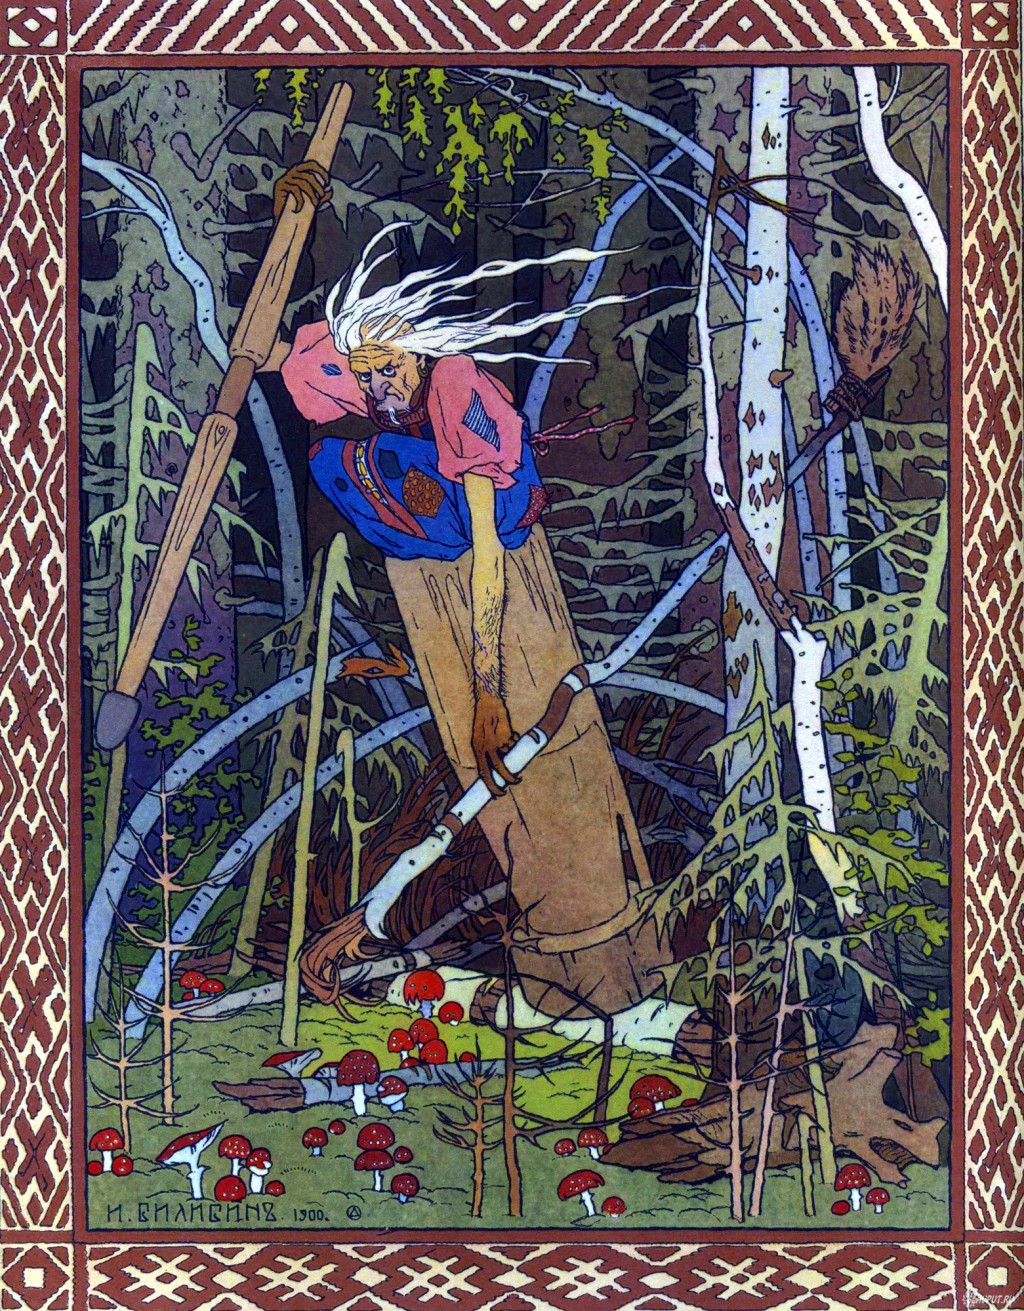 The Fearsome Witch, Baba Yaga, of Slavic Folklore